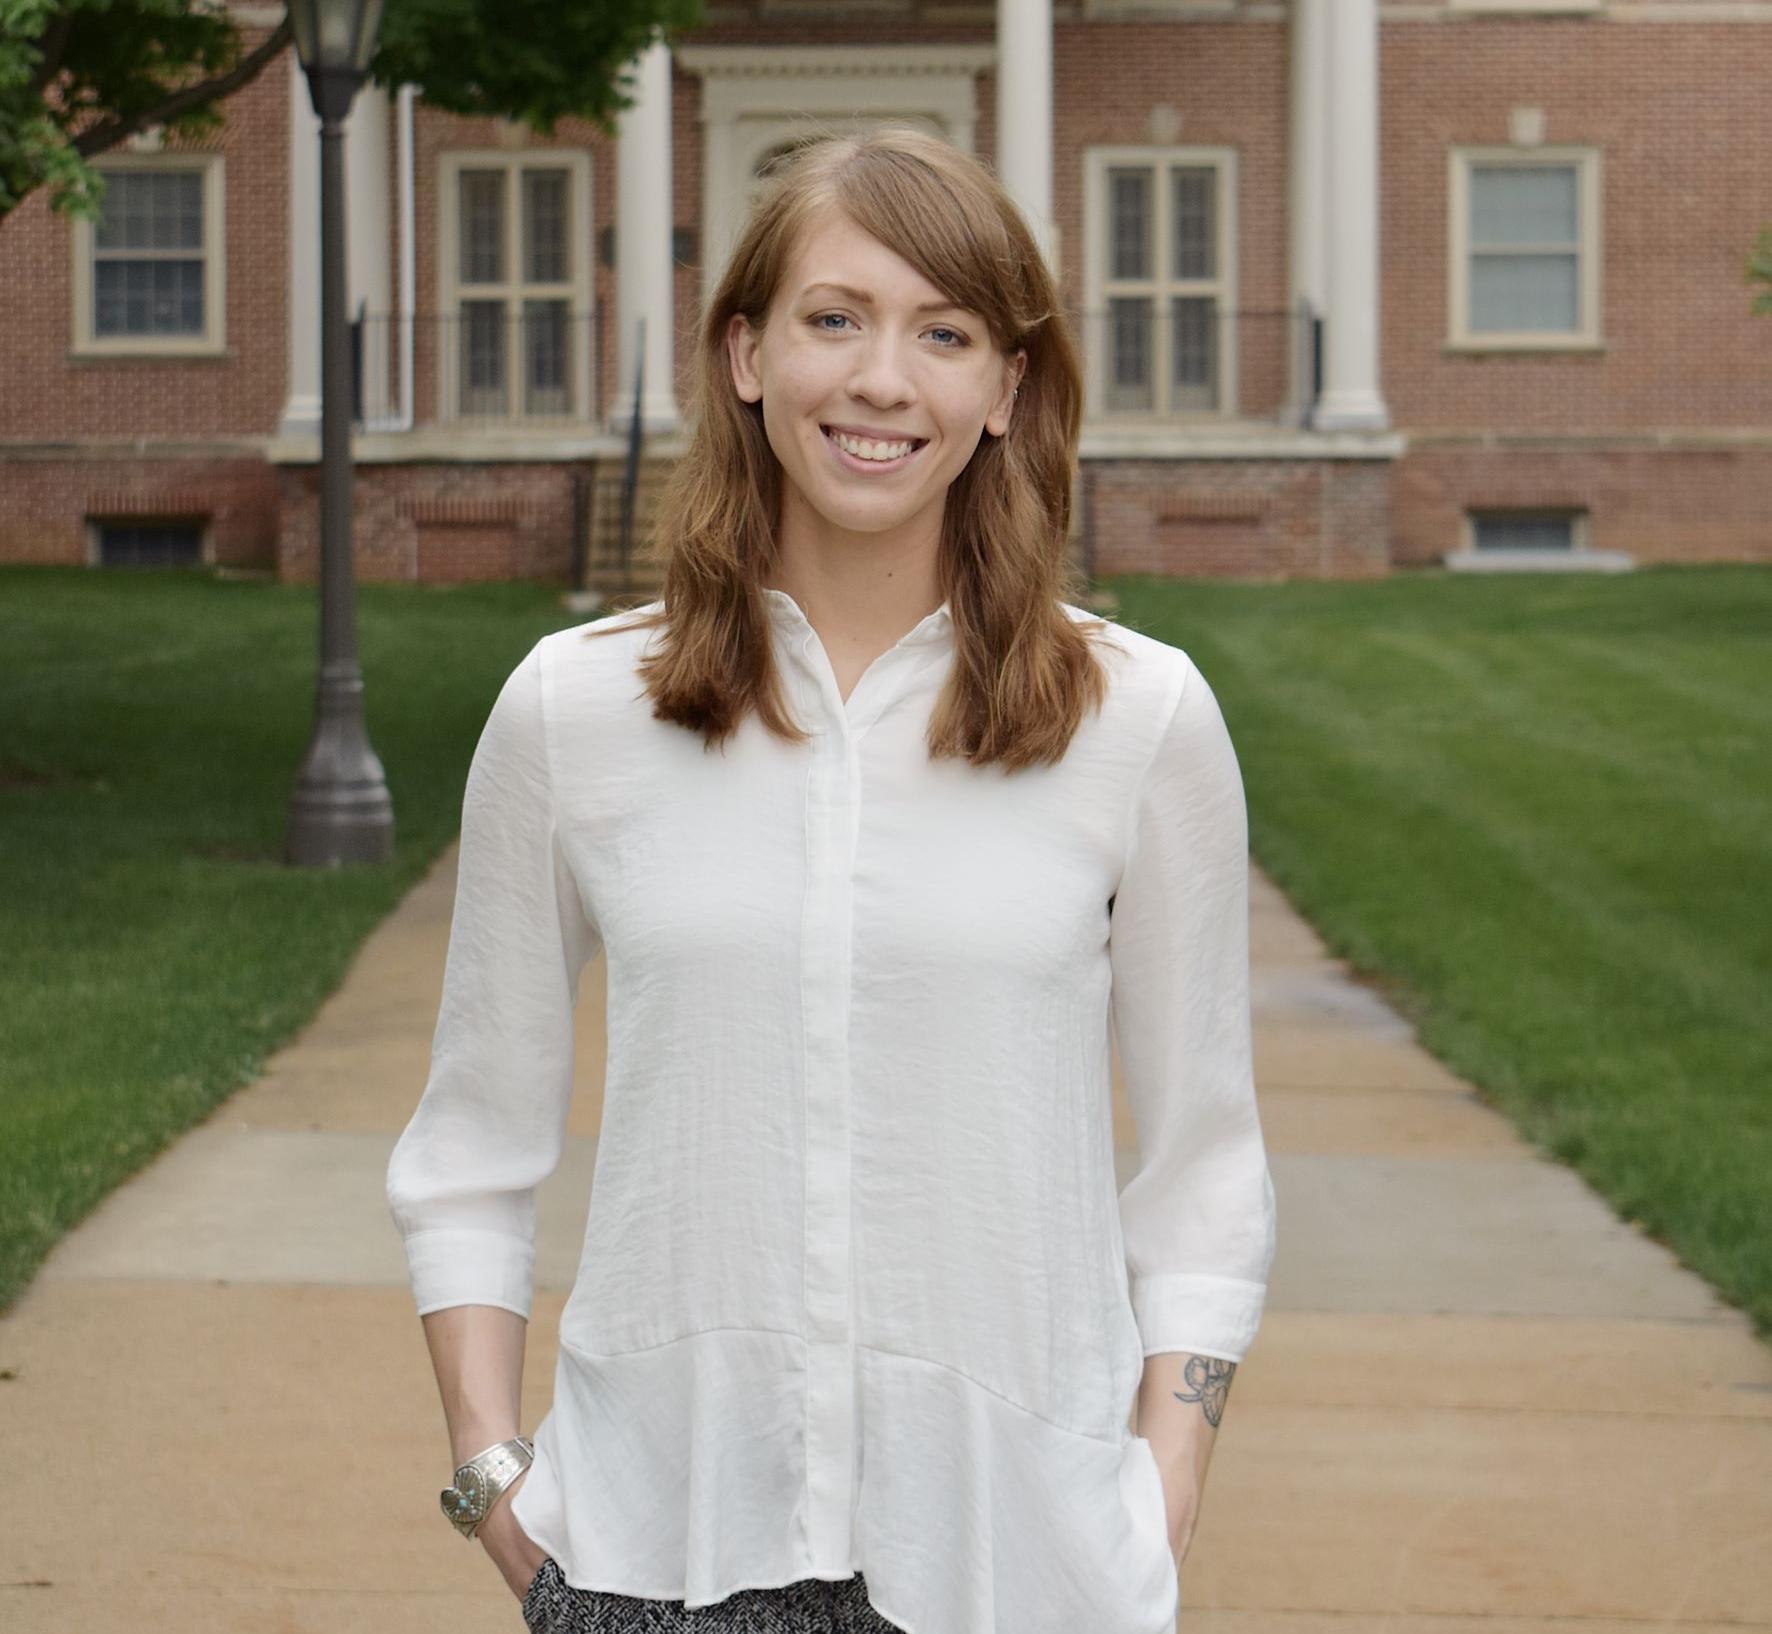 Shelby standing in front of a brick campus building